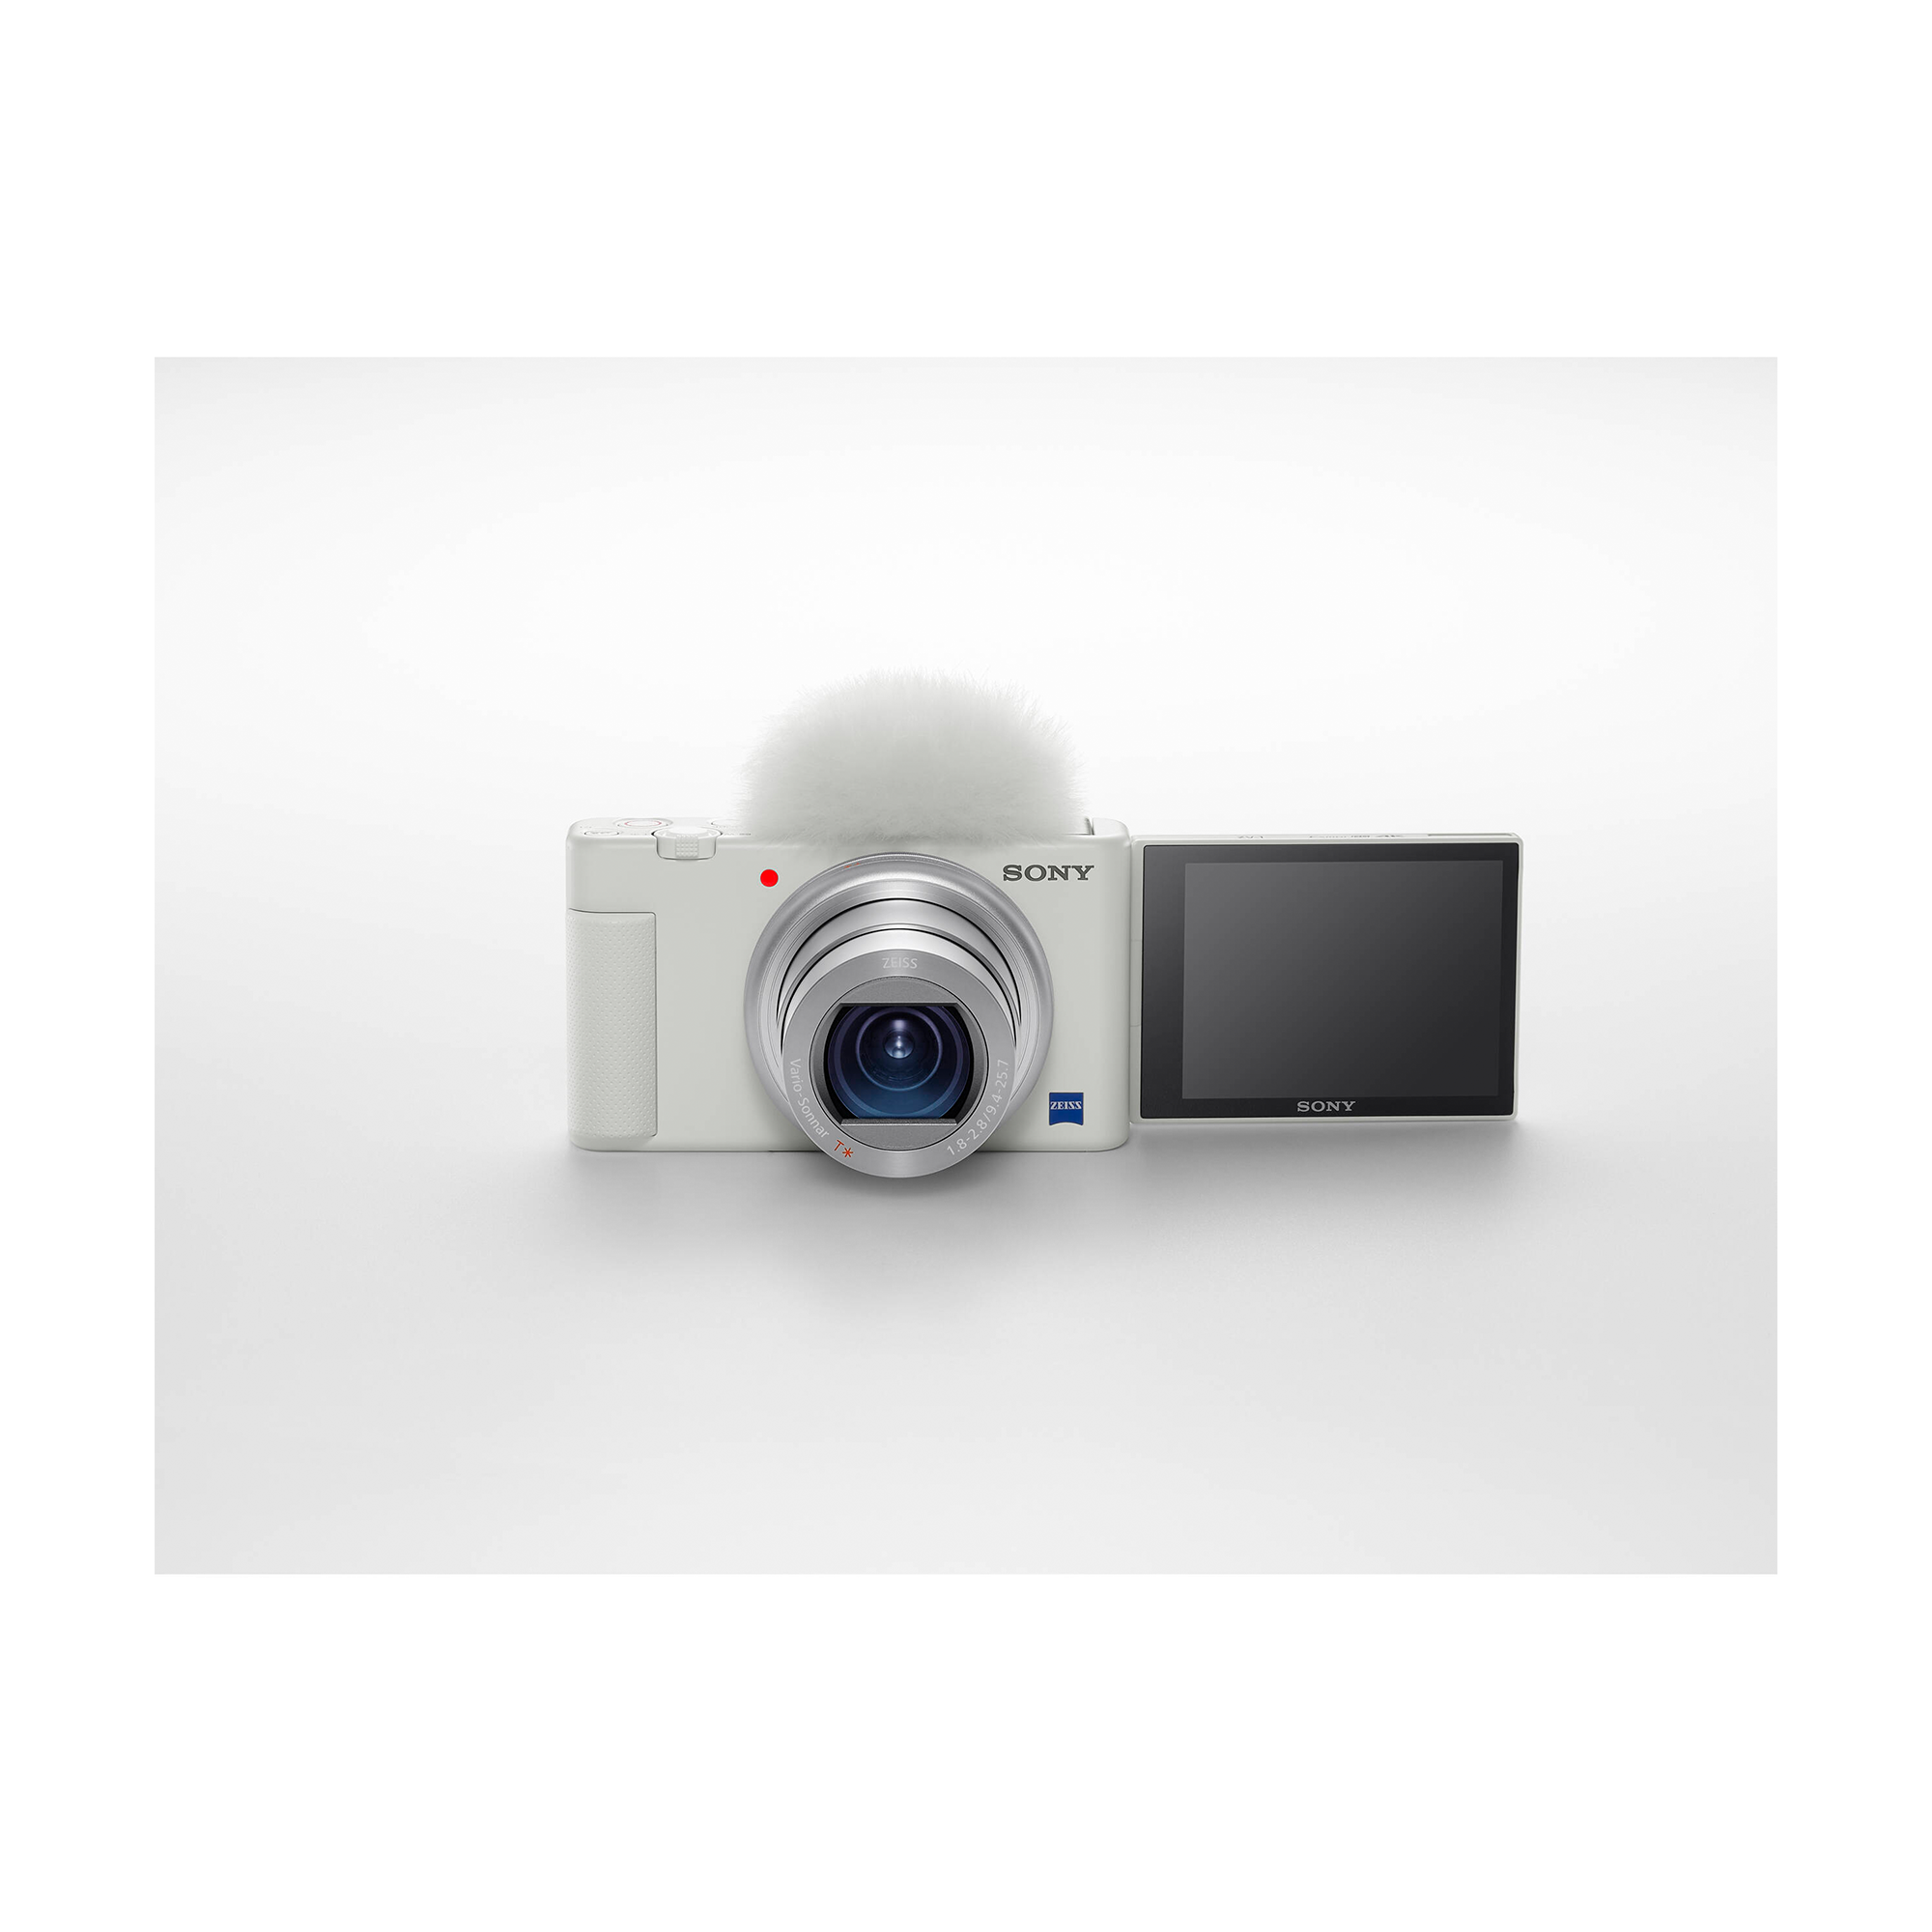 Sony ZV-1 Digital Camera for Content Creators, Vlogging and  with  Flip Screen, Built-in Microphone, 4K HDR Video, Touchscreen Display, Live